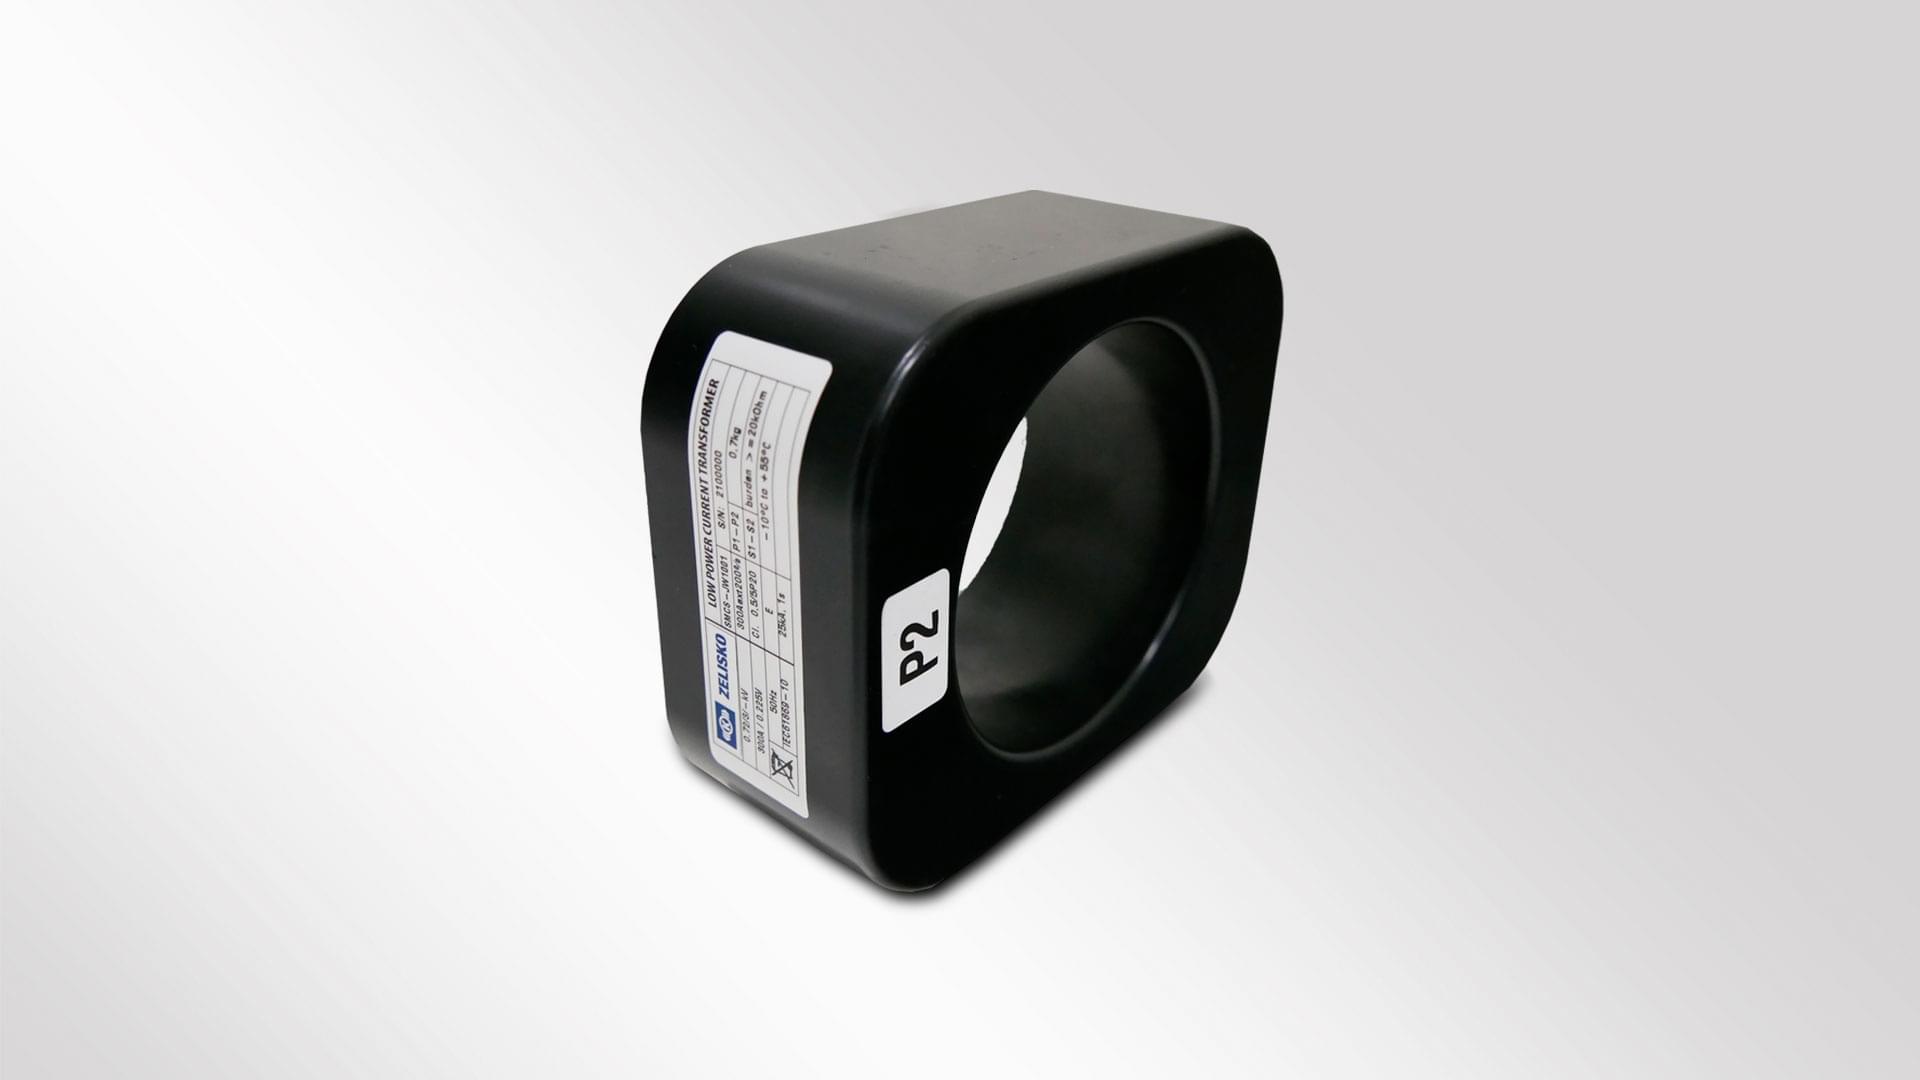 A compact cube-shaped current sensor designed for current measurement in medium, low and high voltage switchgears